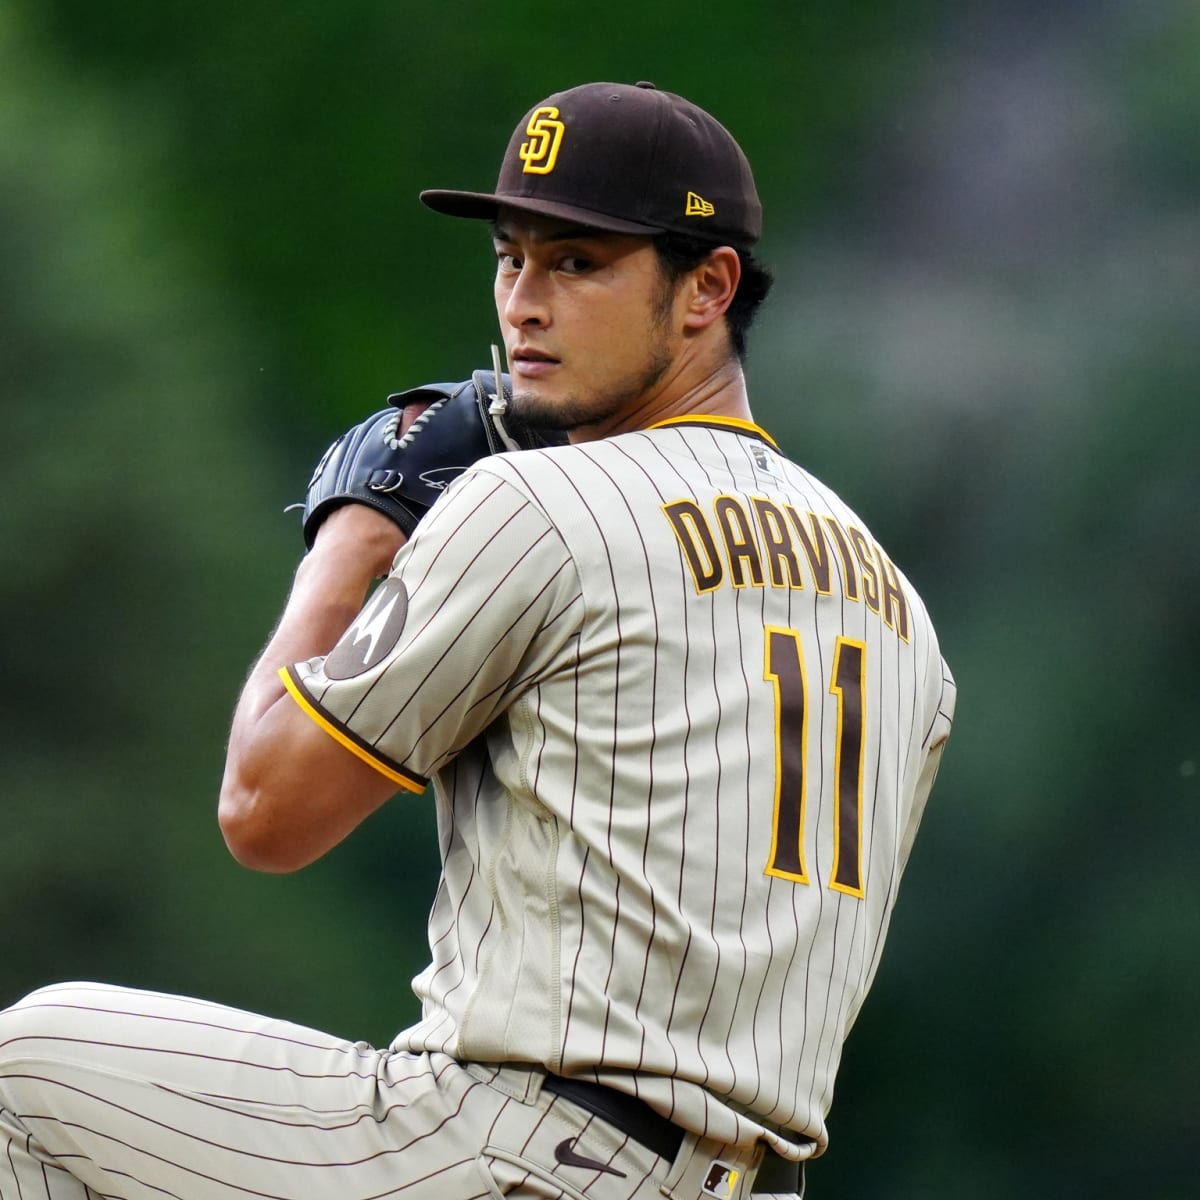 Baseball's arm epidemic is getting worse, and Yu Darvish is just the latest